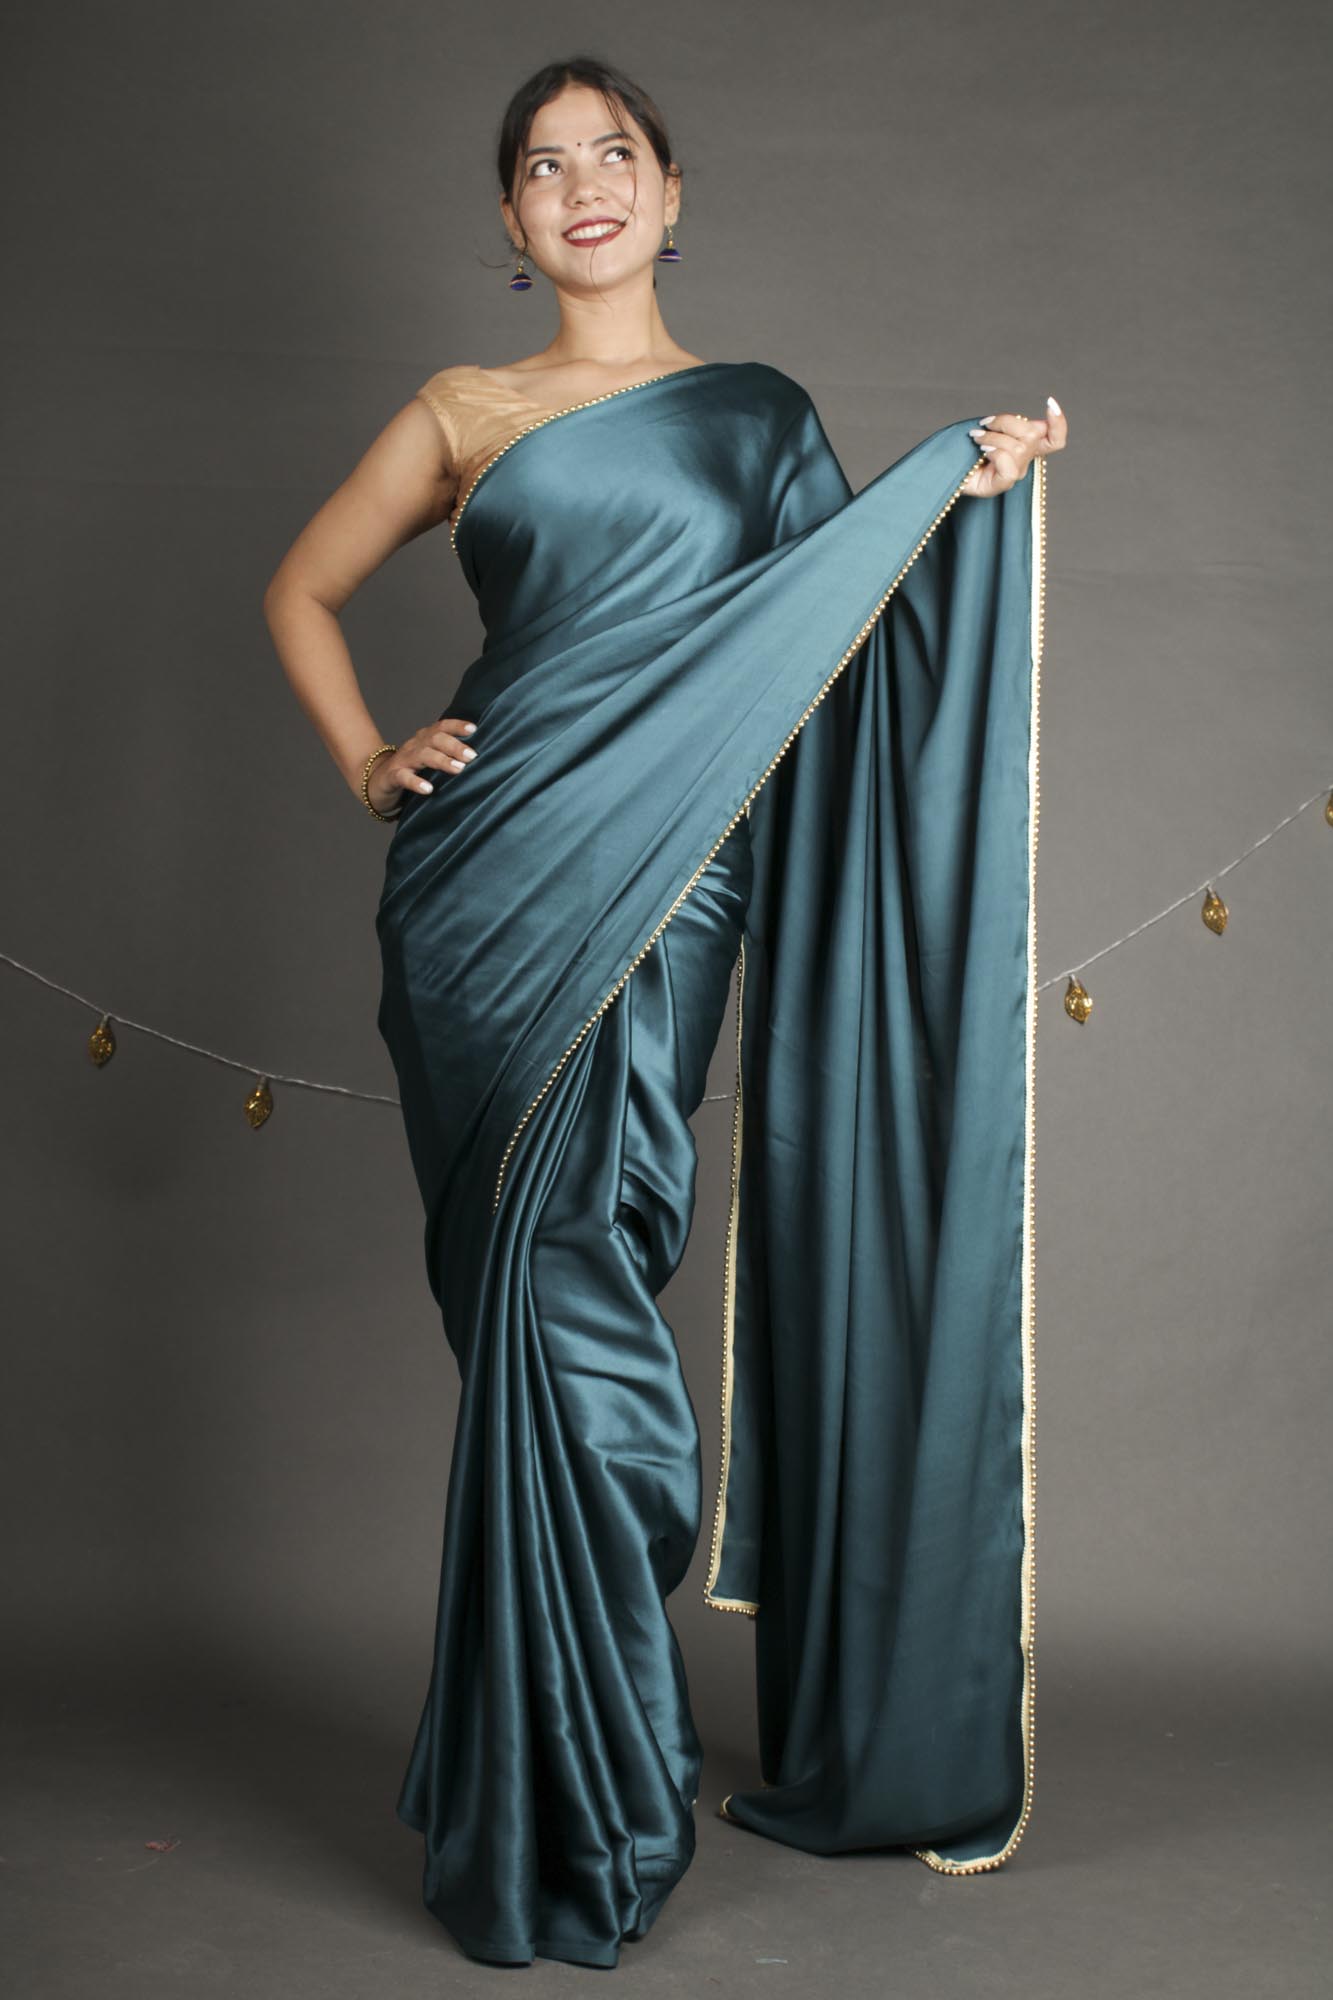 Turquoise Blue Satin Wrap in 1 Minute Saree - Isadora Life Online Shopping Store